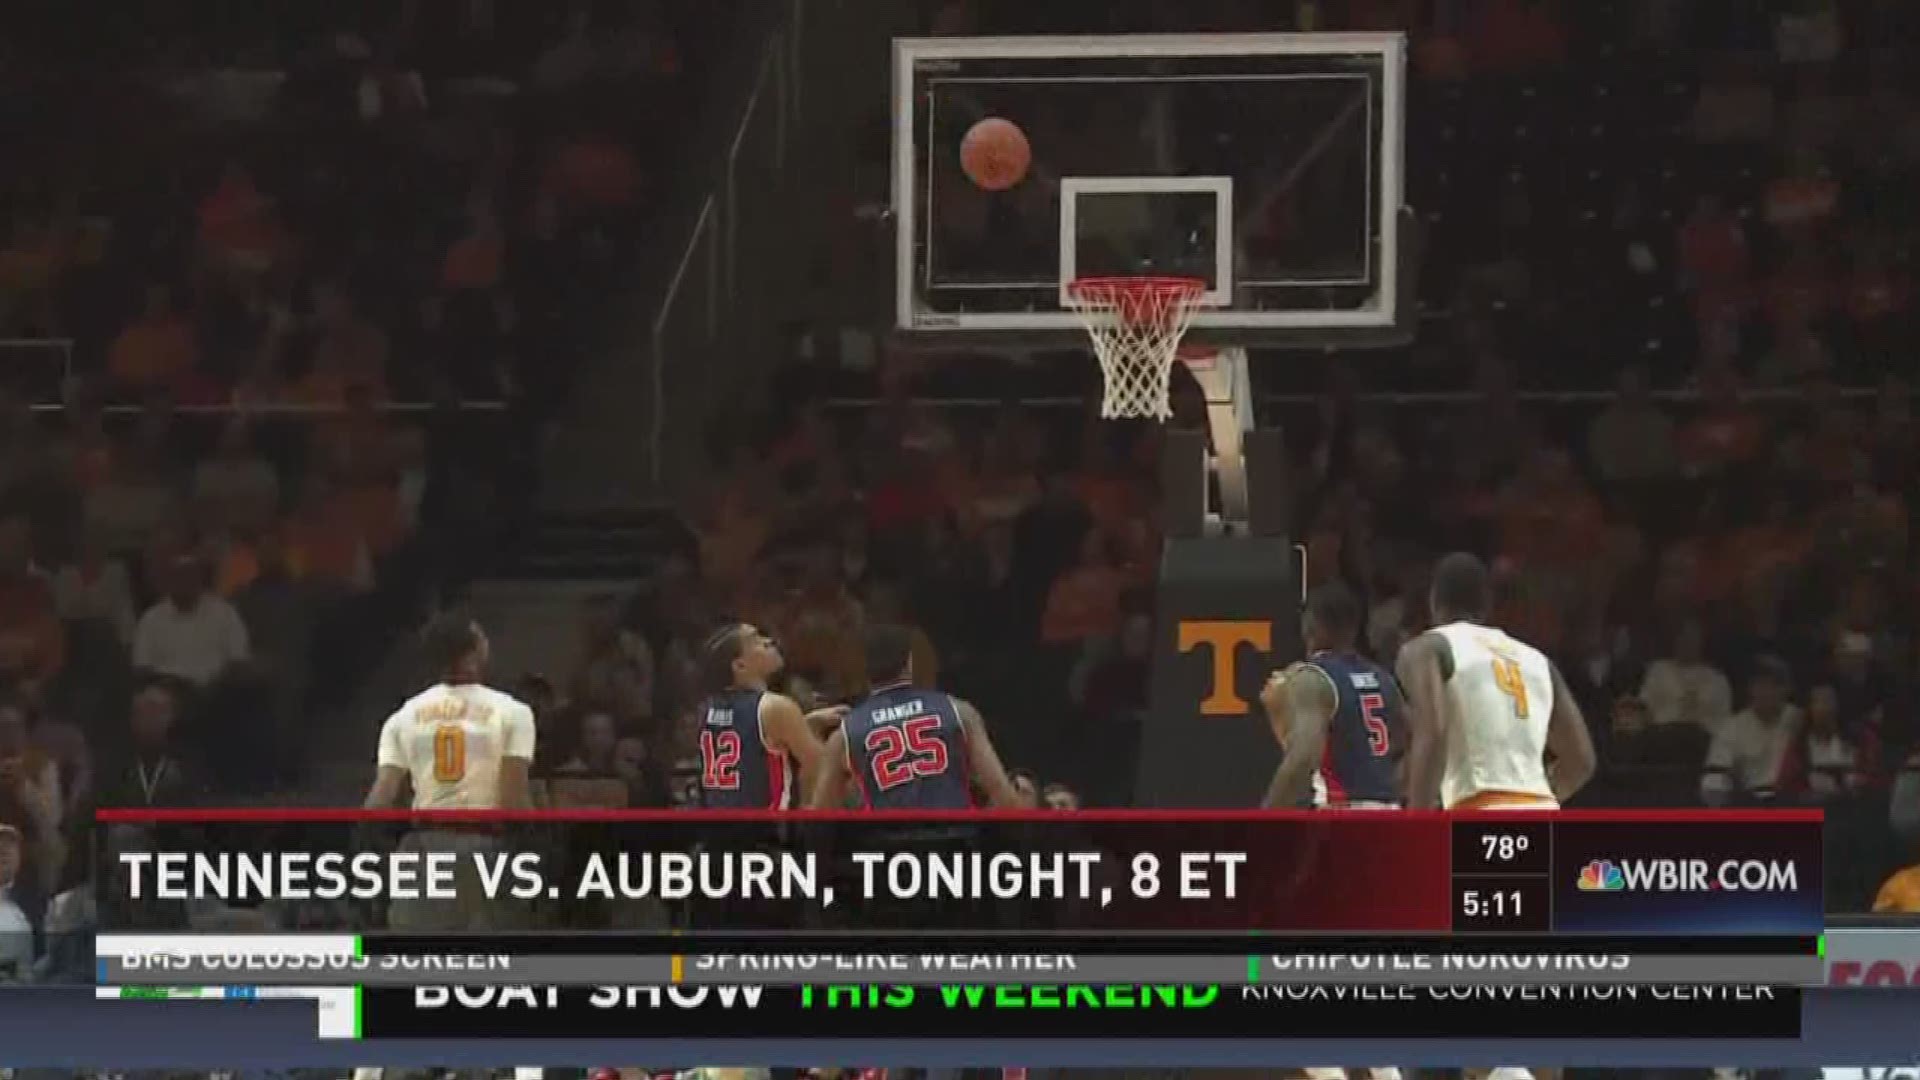 The #12 seed Vols play #13 seed Auburn at 8 pm.